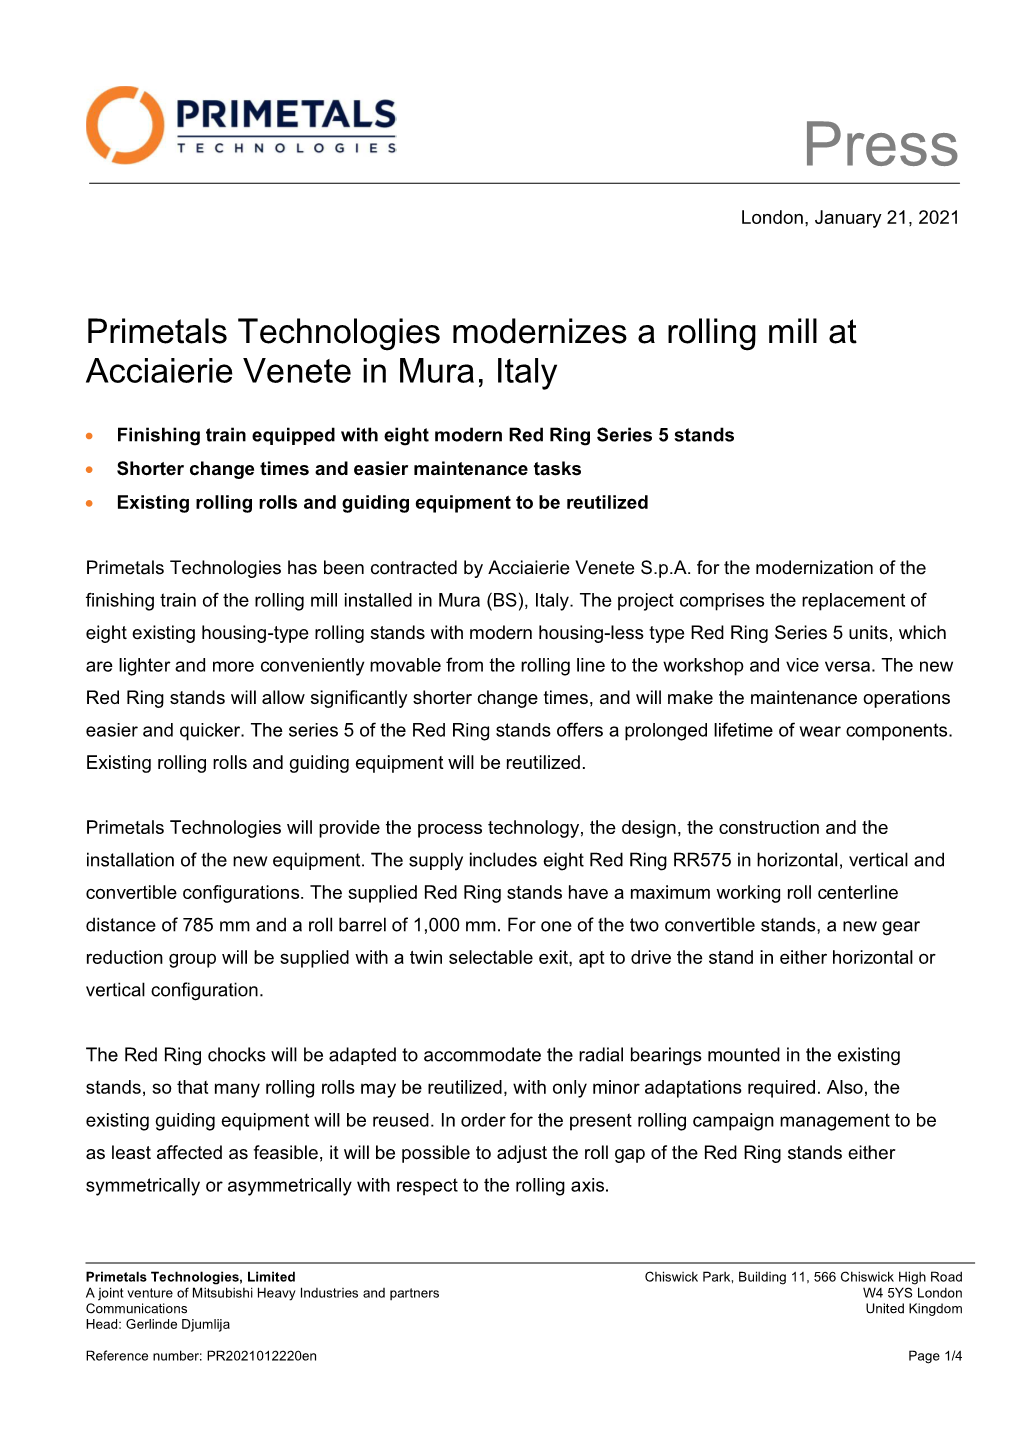 Primetals Technologies Modernizes a Rolling Mill at Acciaierie Venete in Mura, Italy